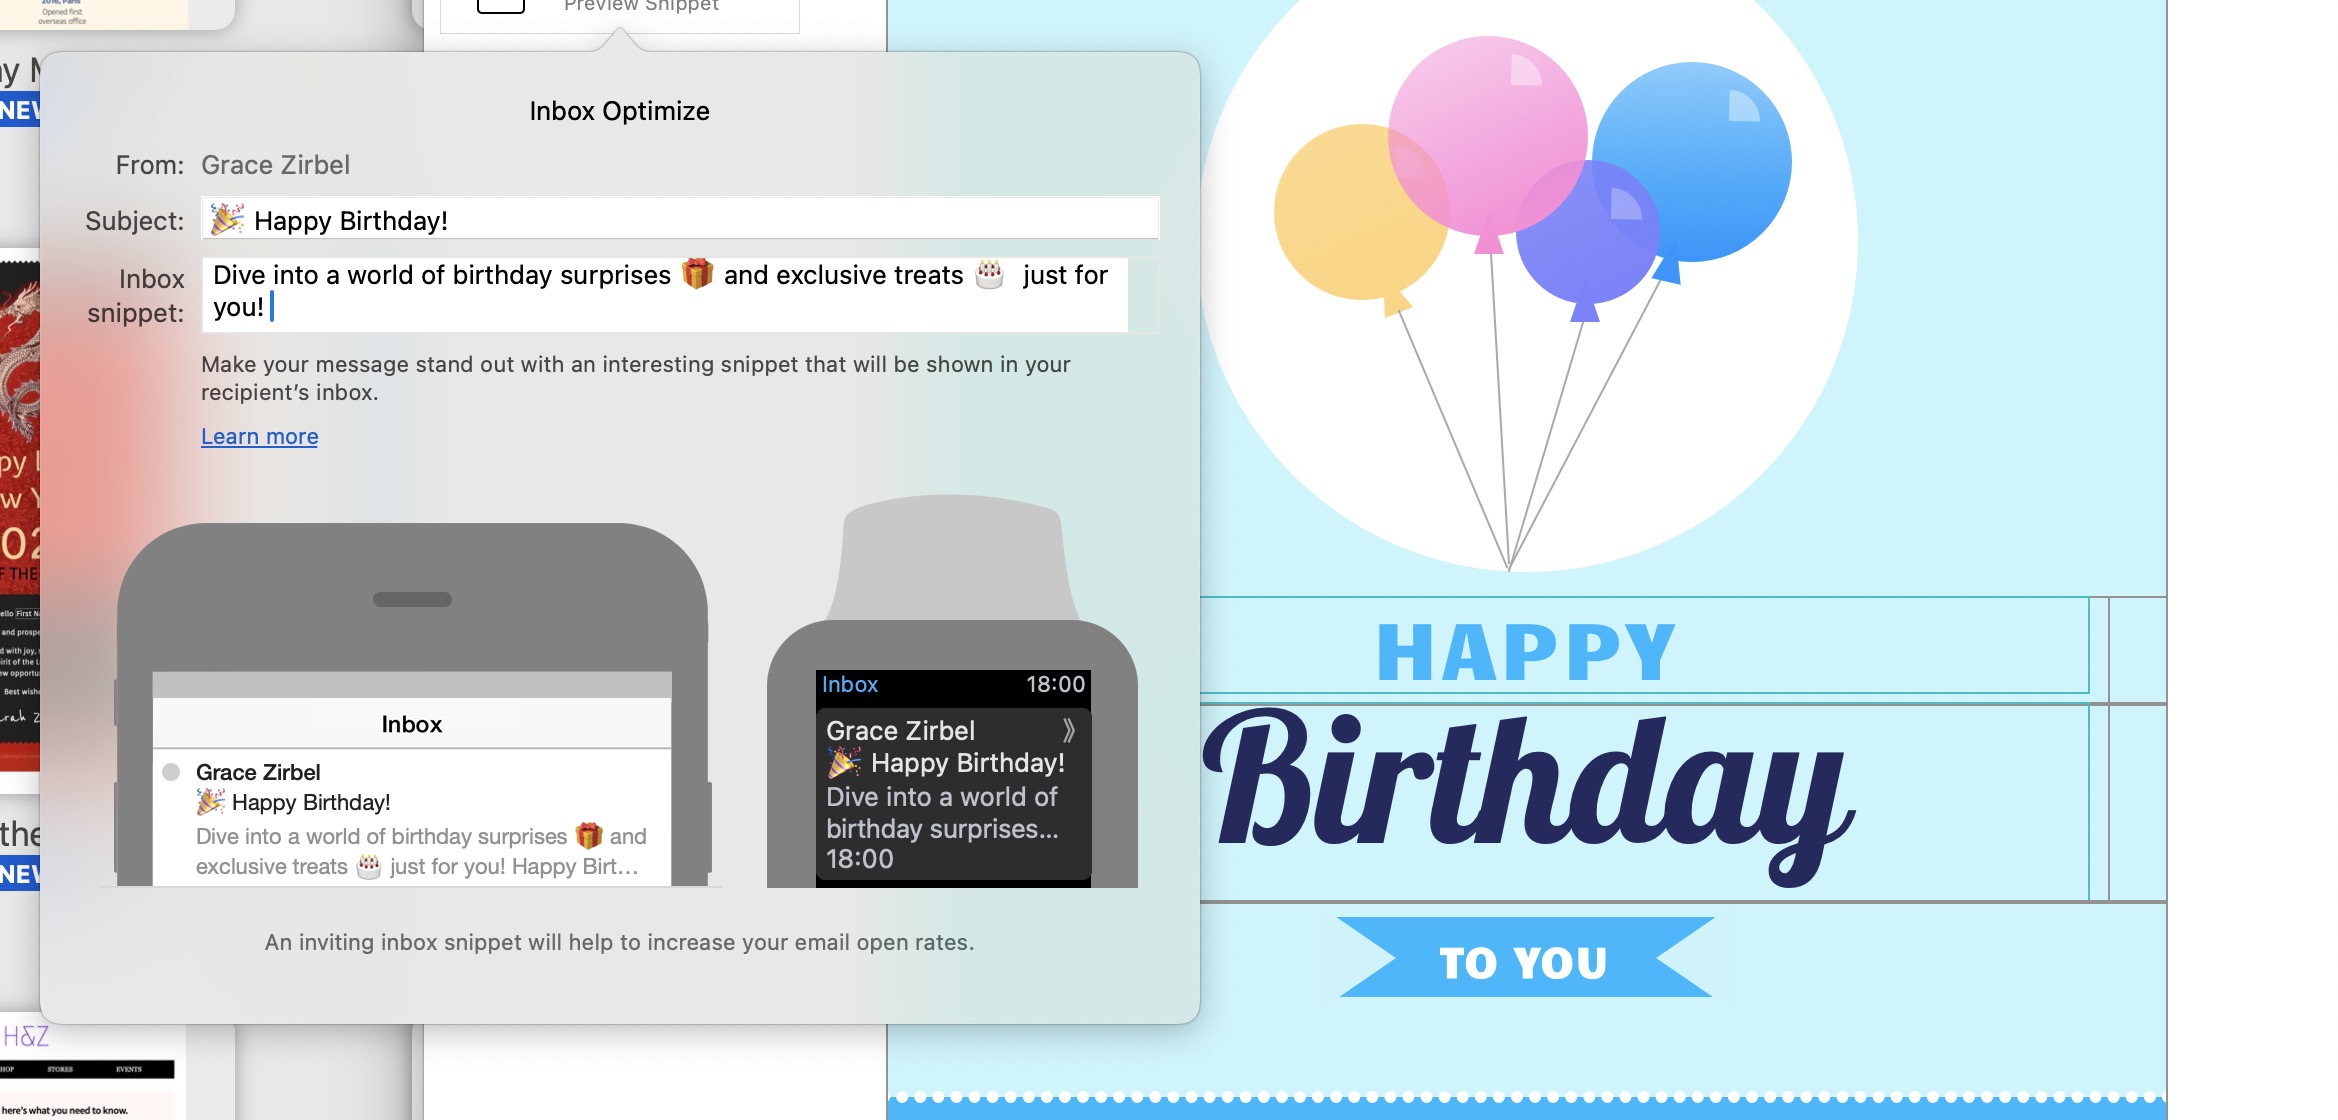 Birthday Inbox Preview Text